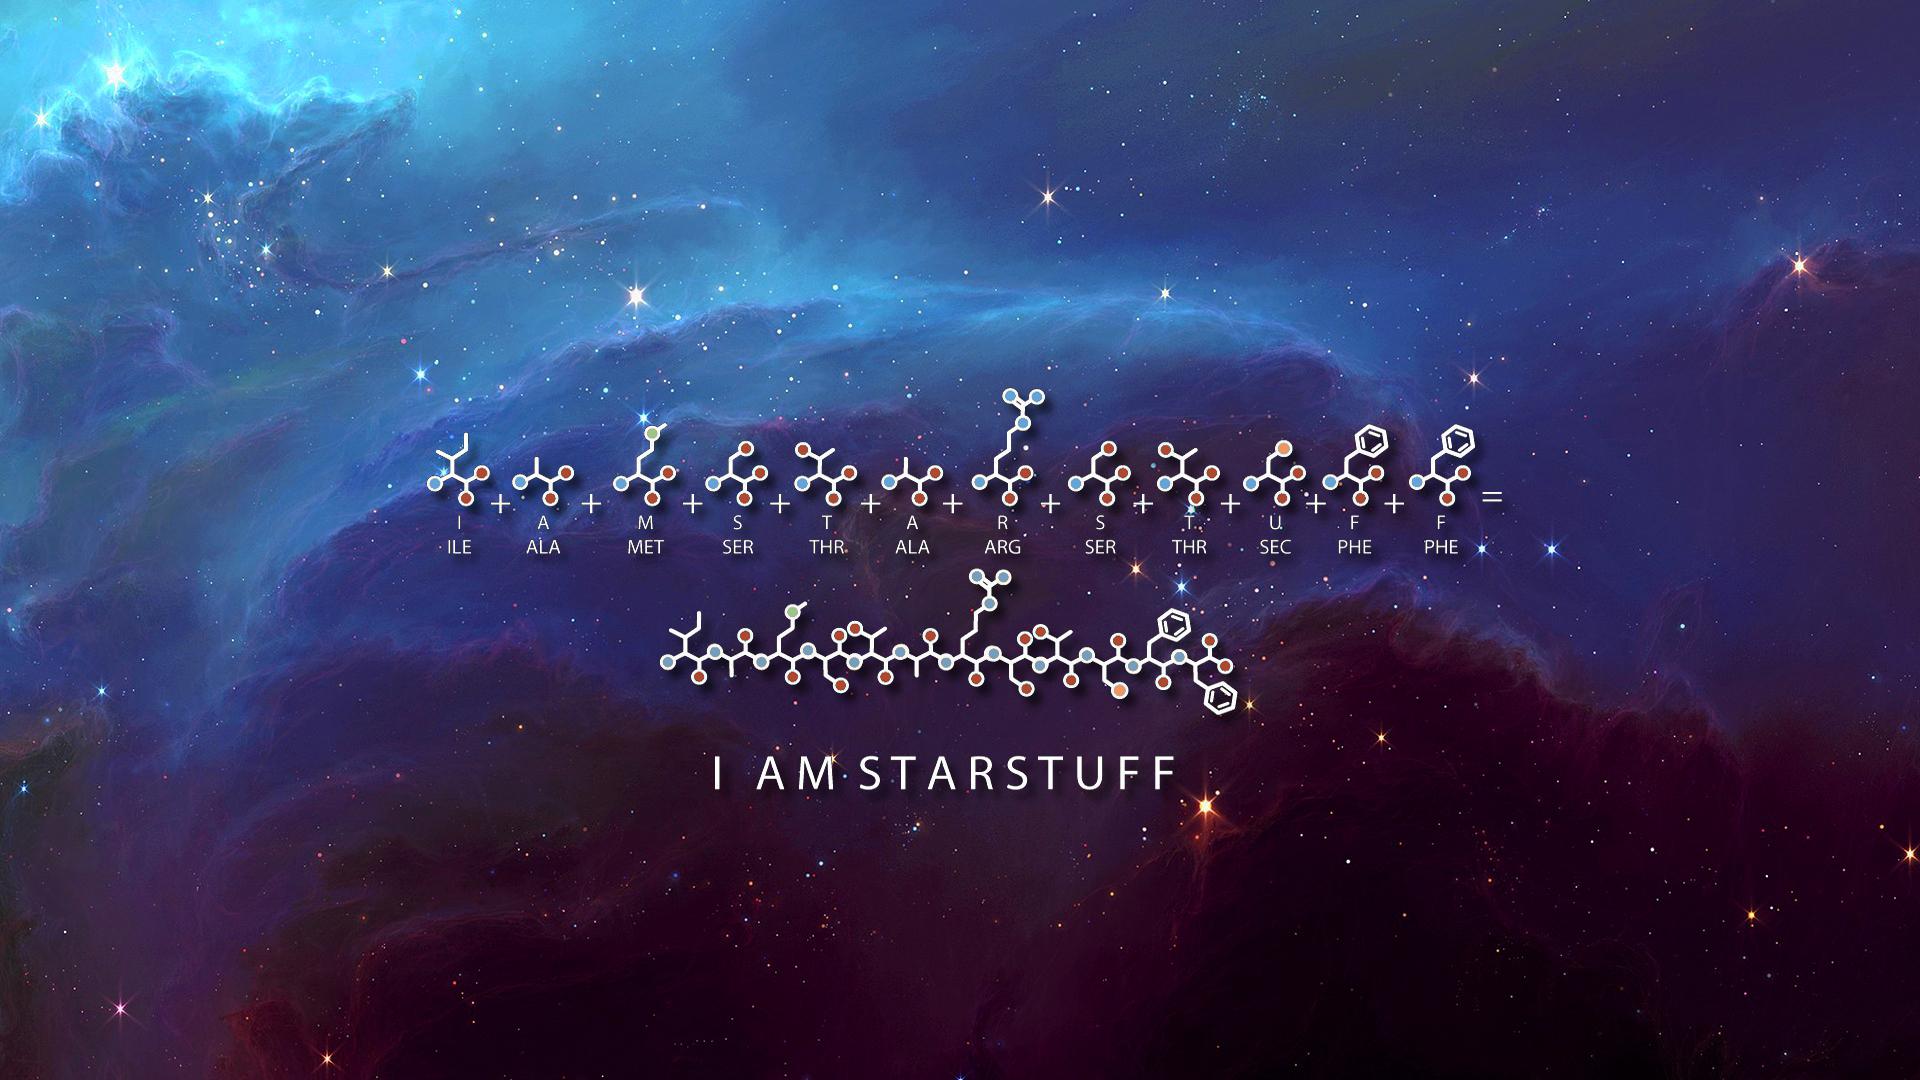 I Am Starstuff 1920x1080 combined one of my favorite wallpaper with a cool nebula wallpaper. I actually have the molecule chain tattooed on my side. We are Star stuff contemplating